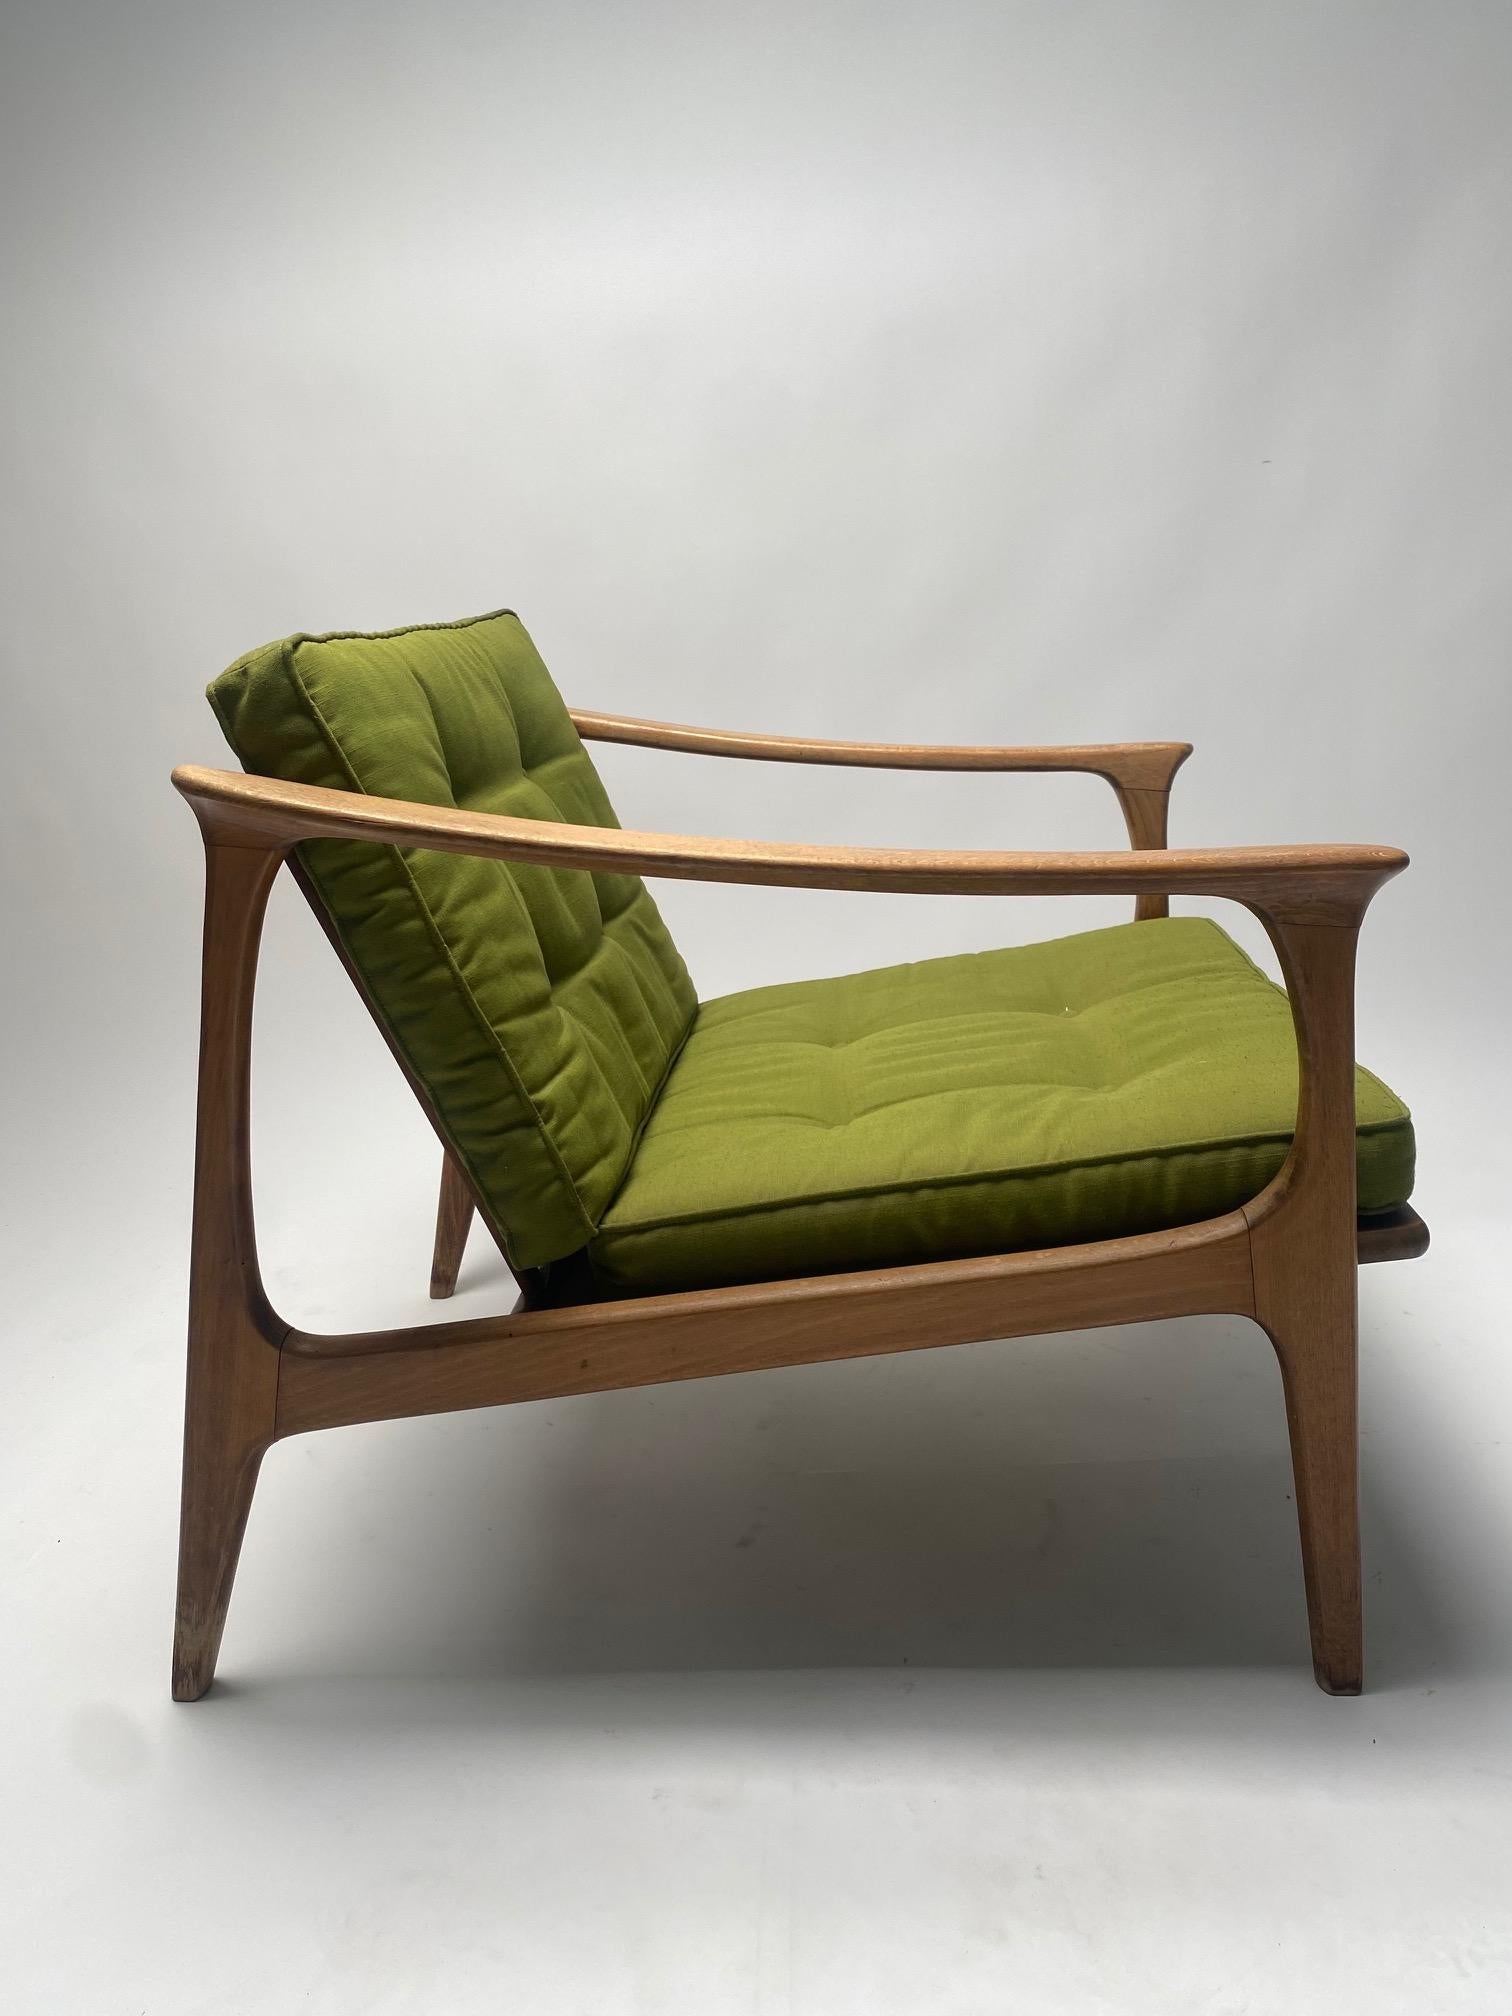 Mid Century modern organic armchair, Denmark, 1960s.

Interesting armchair with wooden structure and fabric cushions in the style of Finn Juhl, Denmark, 1960s